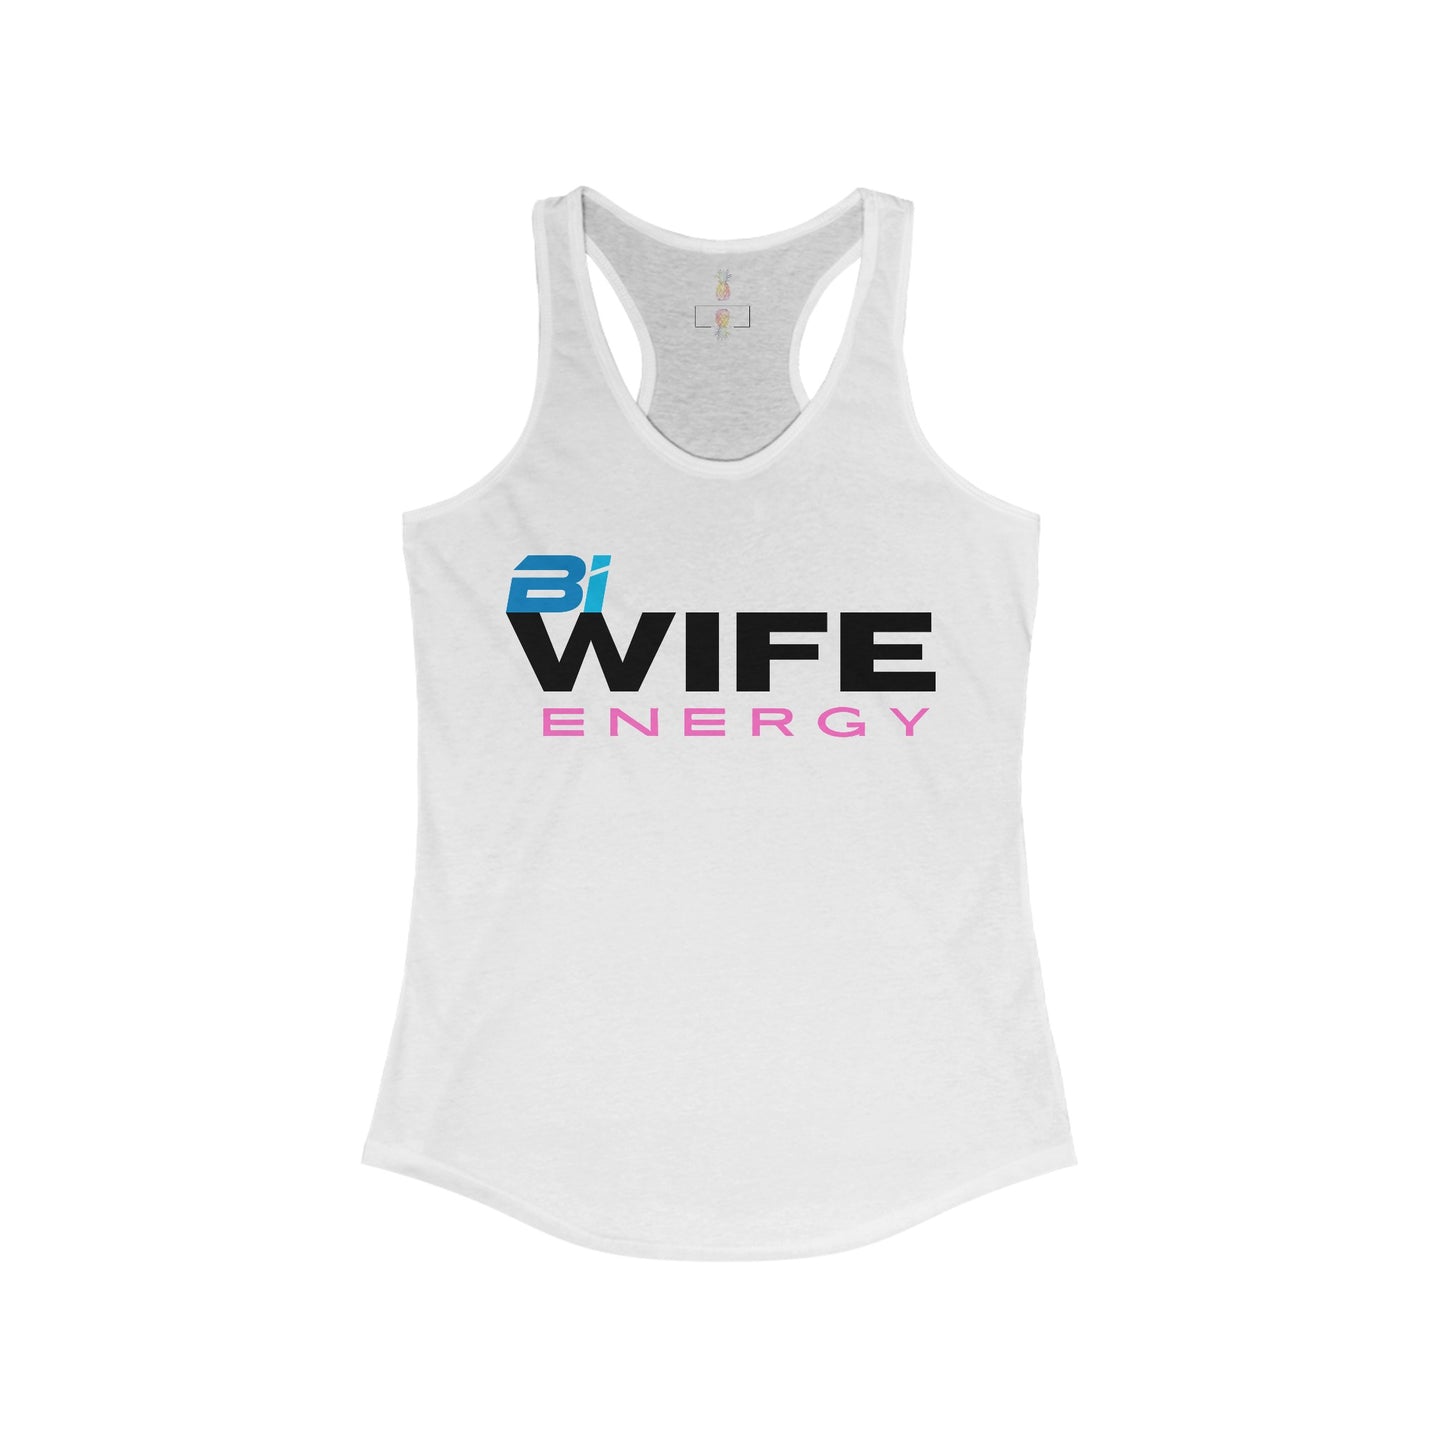 Front view of LAYNE STUDIO "Bi-Wife Energy" Graphic Solid White Racerback Tank-Top